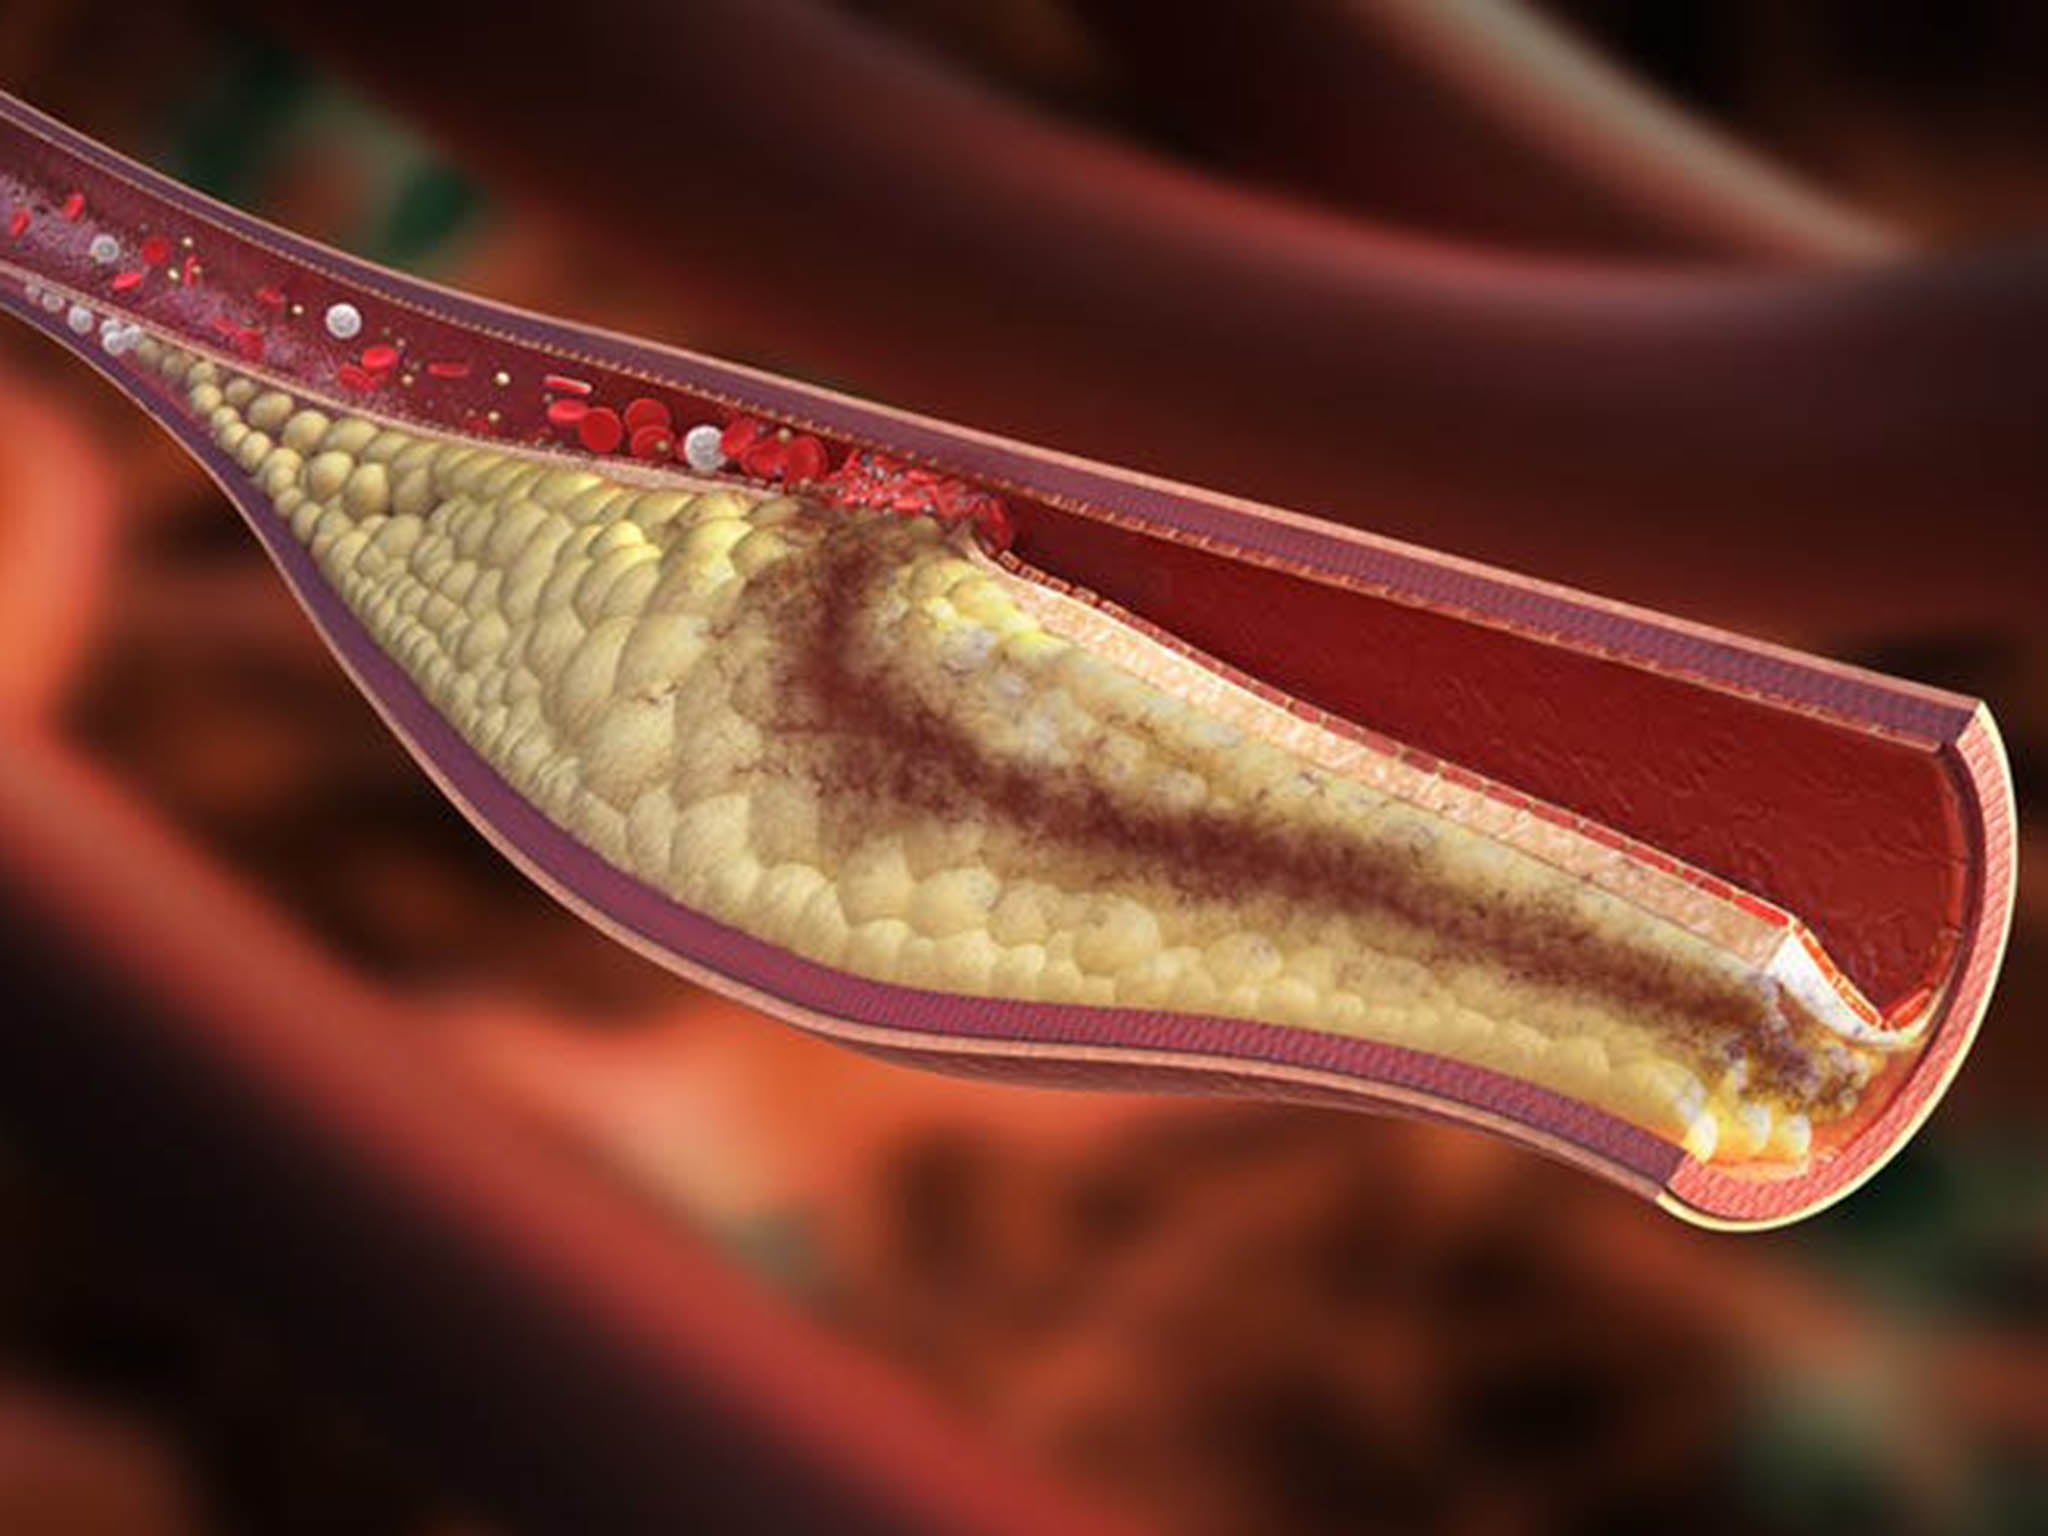 Heart attacks are caused by the build-up of atherosclerotic plaques in the arteries of the heart